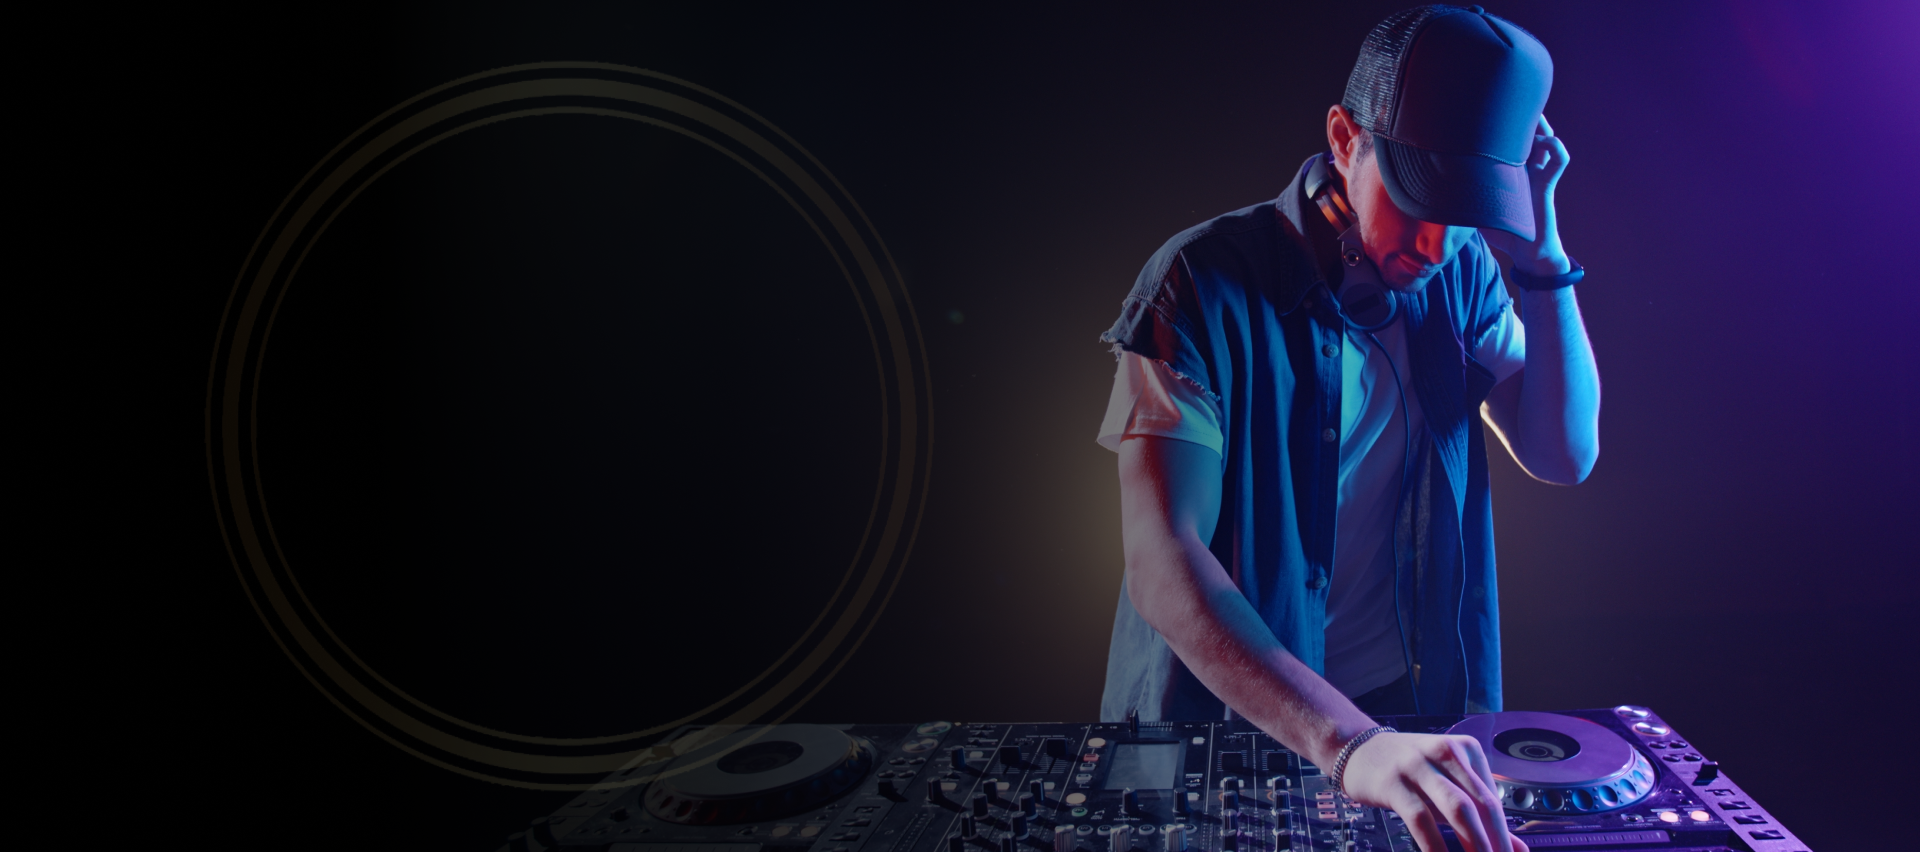 Get customized guidance to unleash your DJing potential at Morgan's Music Academy in North York, Toronto